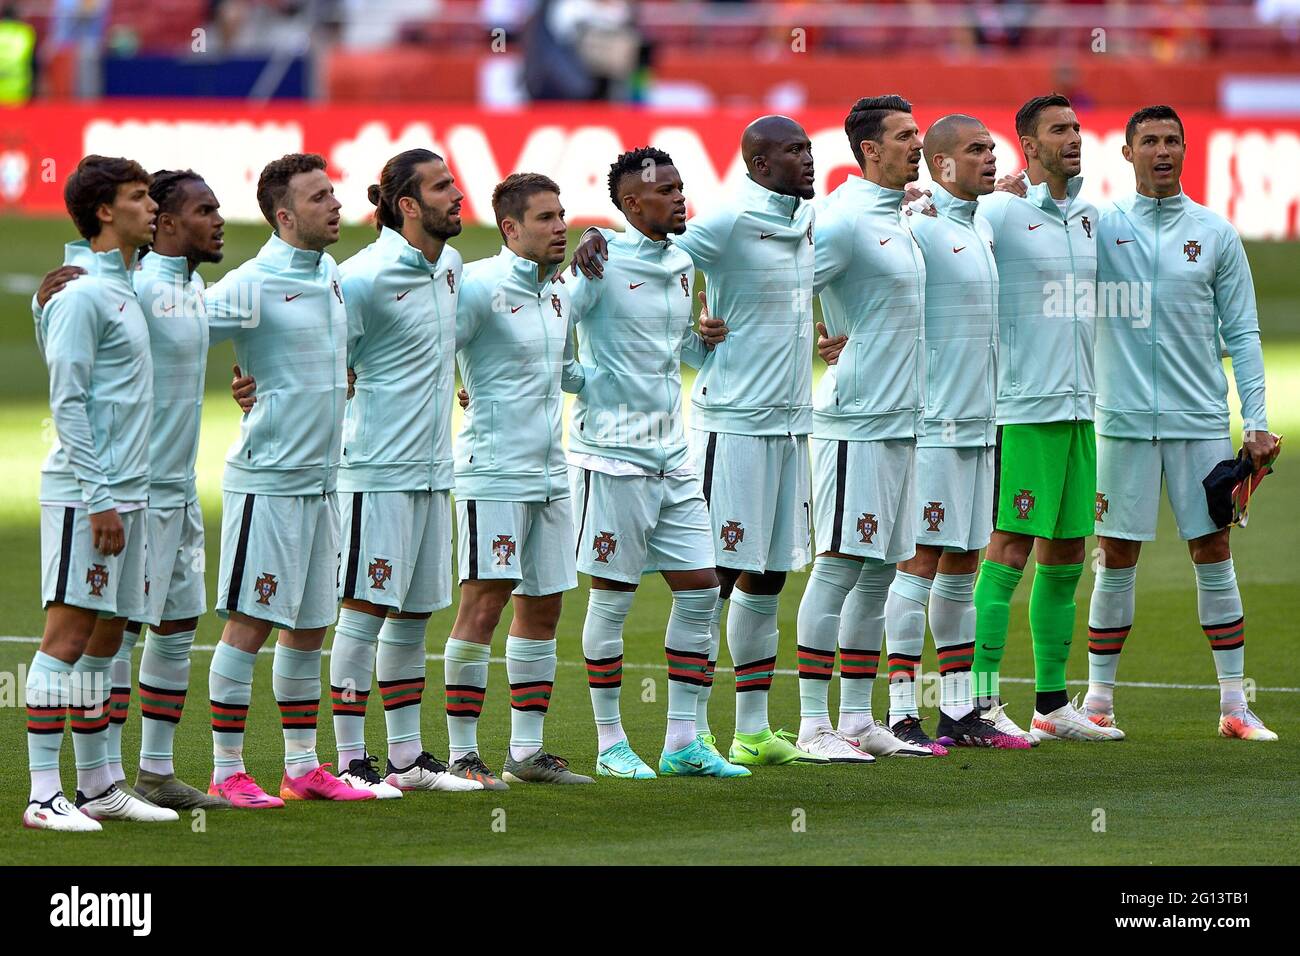 Madrid, Spain. 04th June, 2021. Rui Patricio of Portugal, Nelson Semedo of Portugal, Pepe of Portugal, Raphael Guerreiro of Portugal, Jose Fonte of Portugal, Cristiano Ronaldo of Portugal, Danilo of Portugal, Renato Sanches of Portugal, Diogo Jota of Portugal, Joao Felix of Portugal and Sergio Oliveira of Portugal during the International Friendly match between Spain and Portugal at Wanda Metropolitano on June 4, 2021 in Madrid, Spain (Photo by Pablo Morano/Orange Pictures) Credit: Orange Pics BV/Alamy Live News Stock Photo